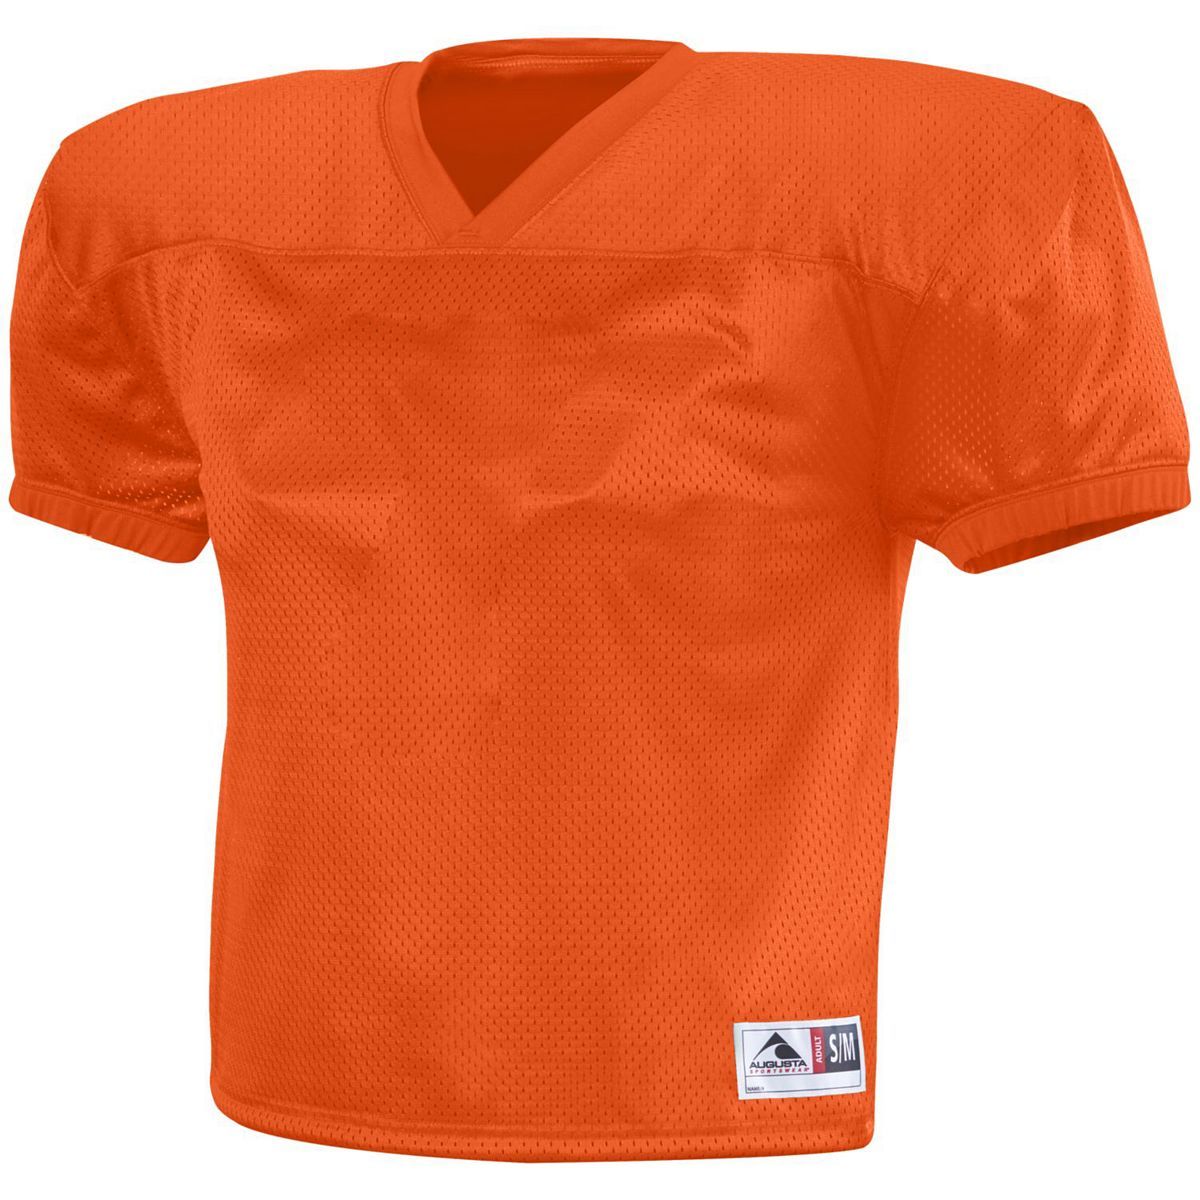 Augusta Sportswear Dash Practice Jersey in Orange  -Part of the Adult, Adult-Jersey, Augusta-Products, Football, Shirts, All-Sports, All-Sports-1 product lines at KanaleyCreations.com